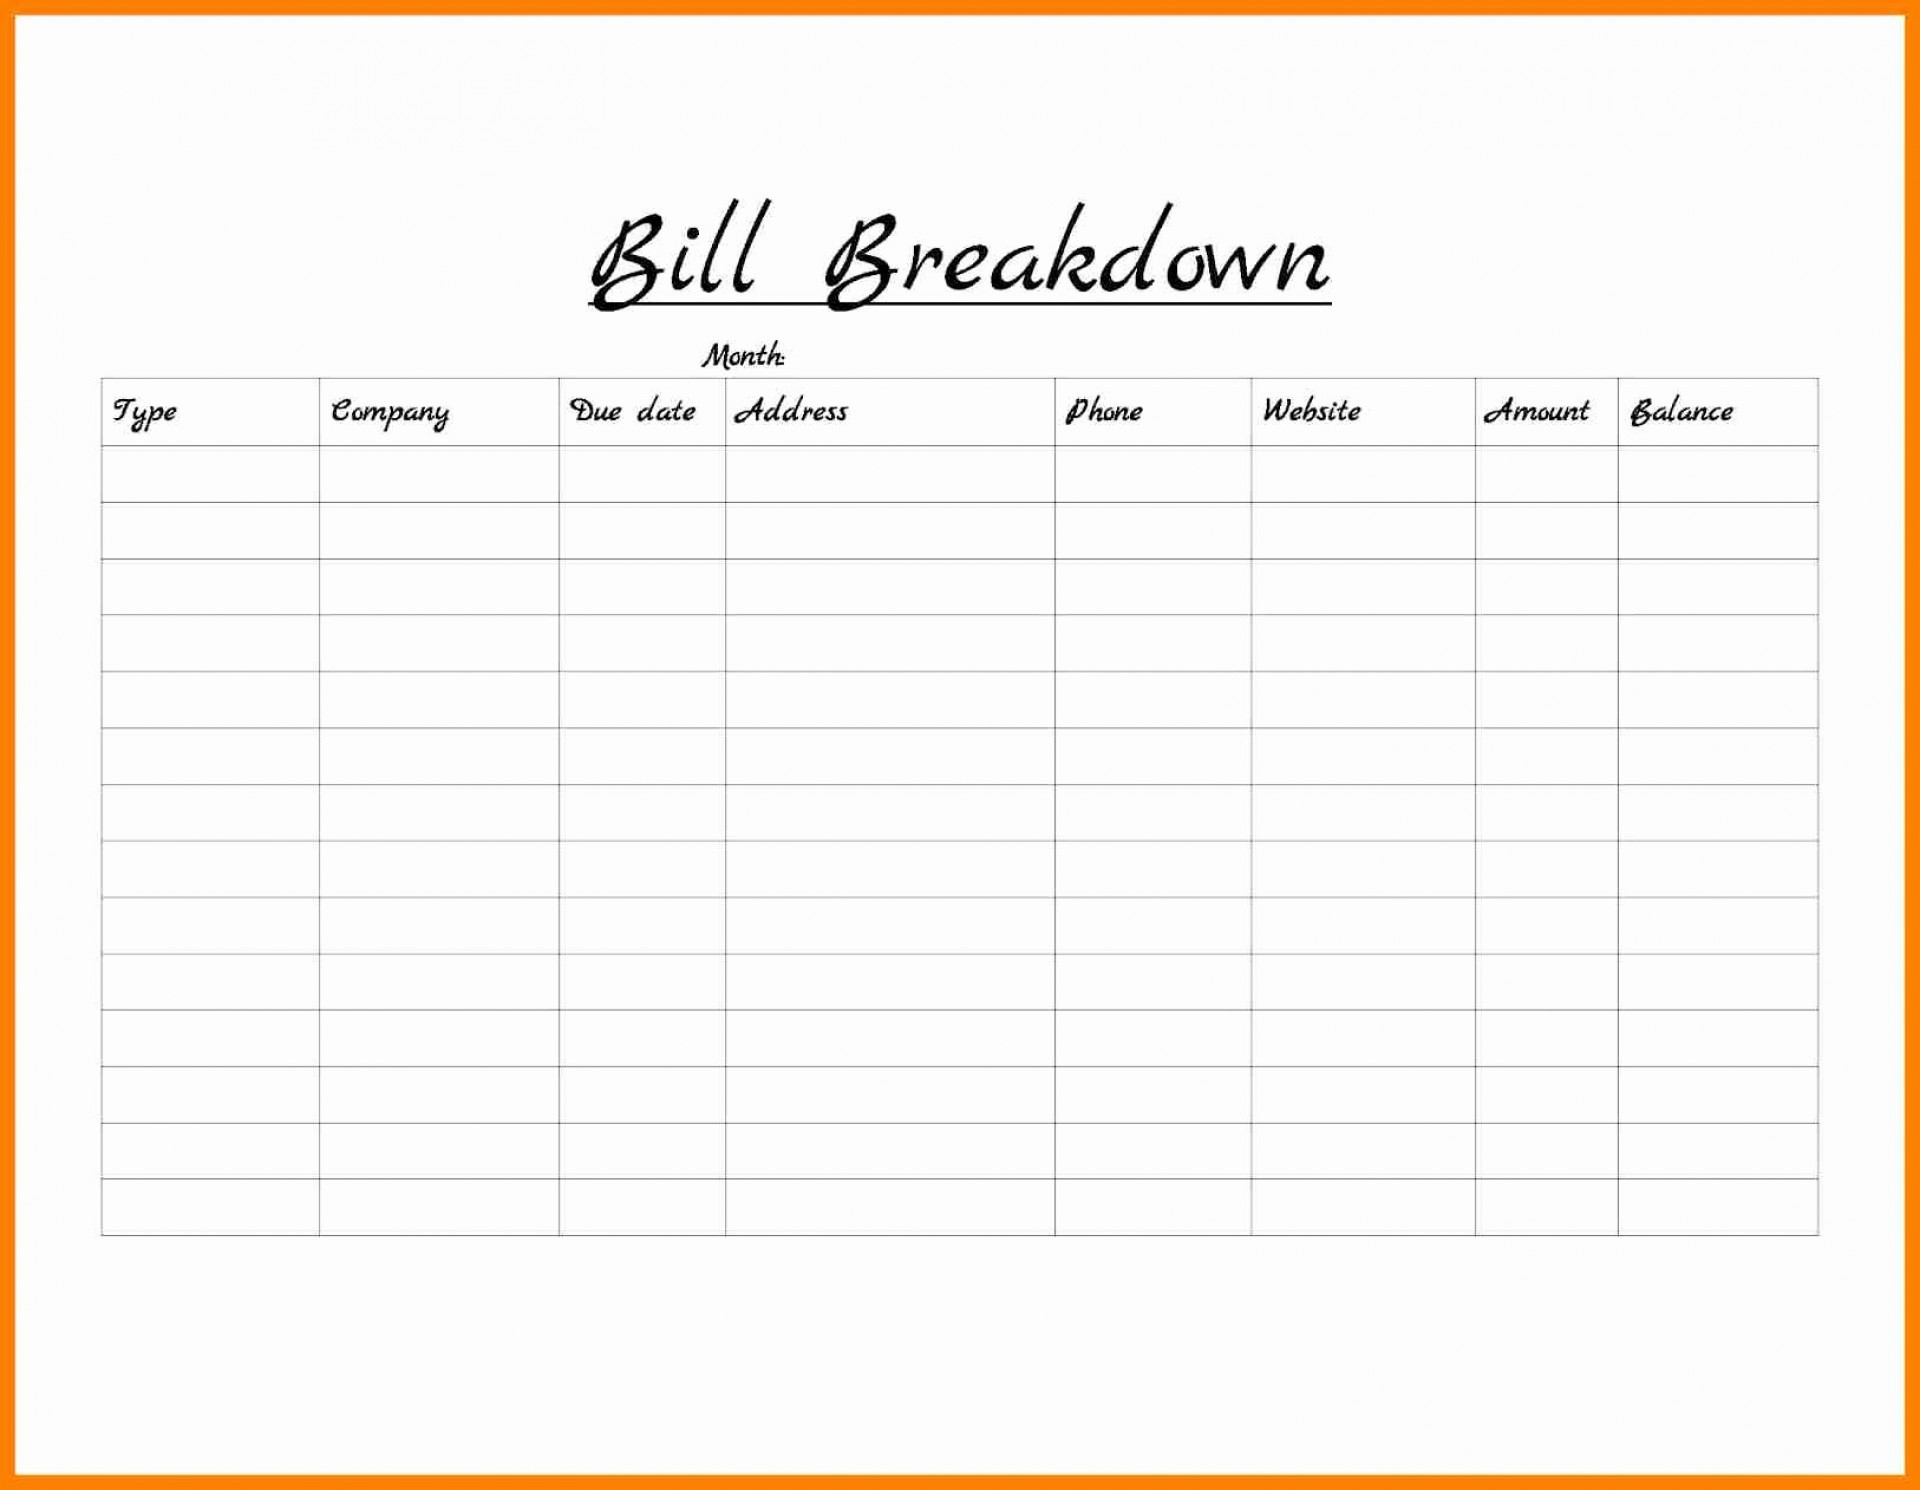 free-monthly-bill-organizer-spreadsheet-within-009-bill-organizeremplate-excel-with-payment